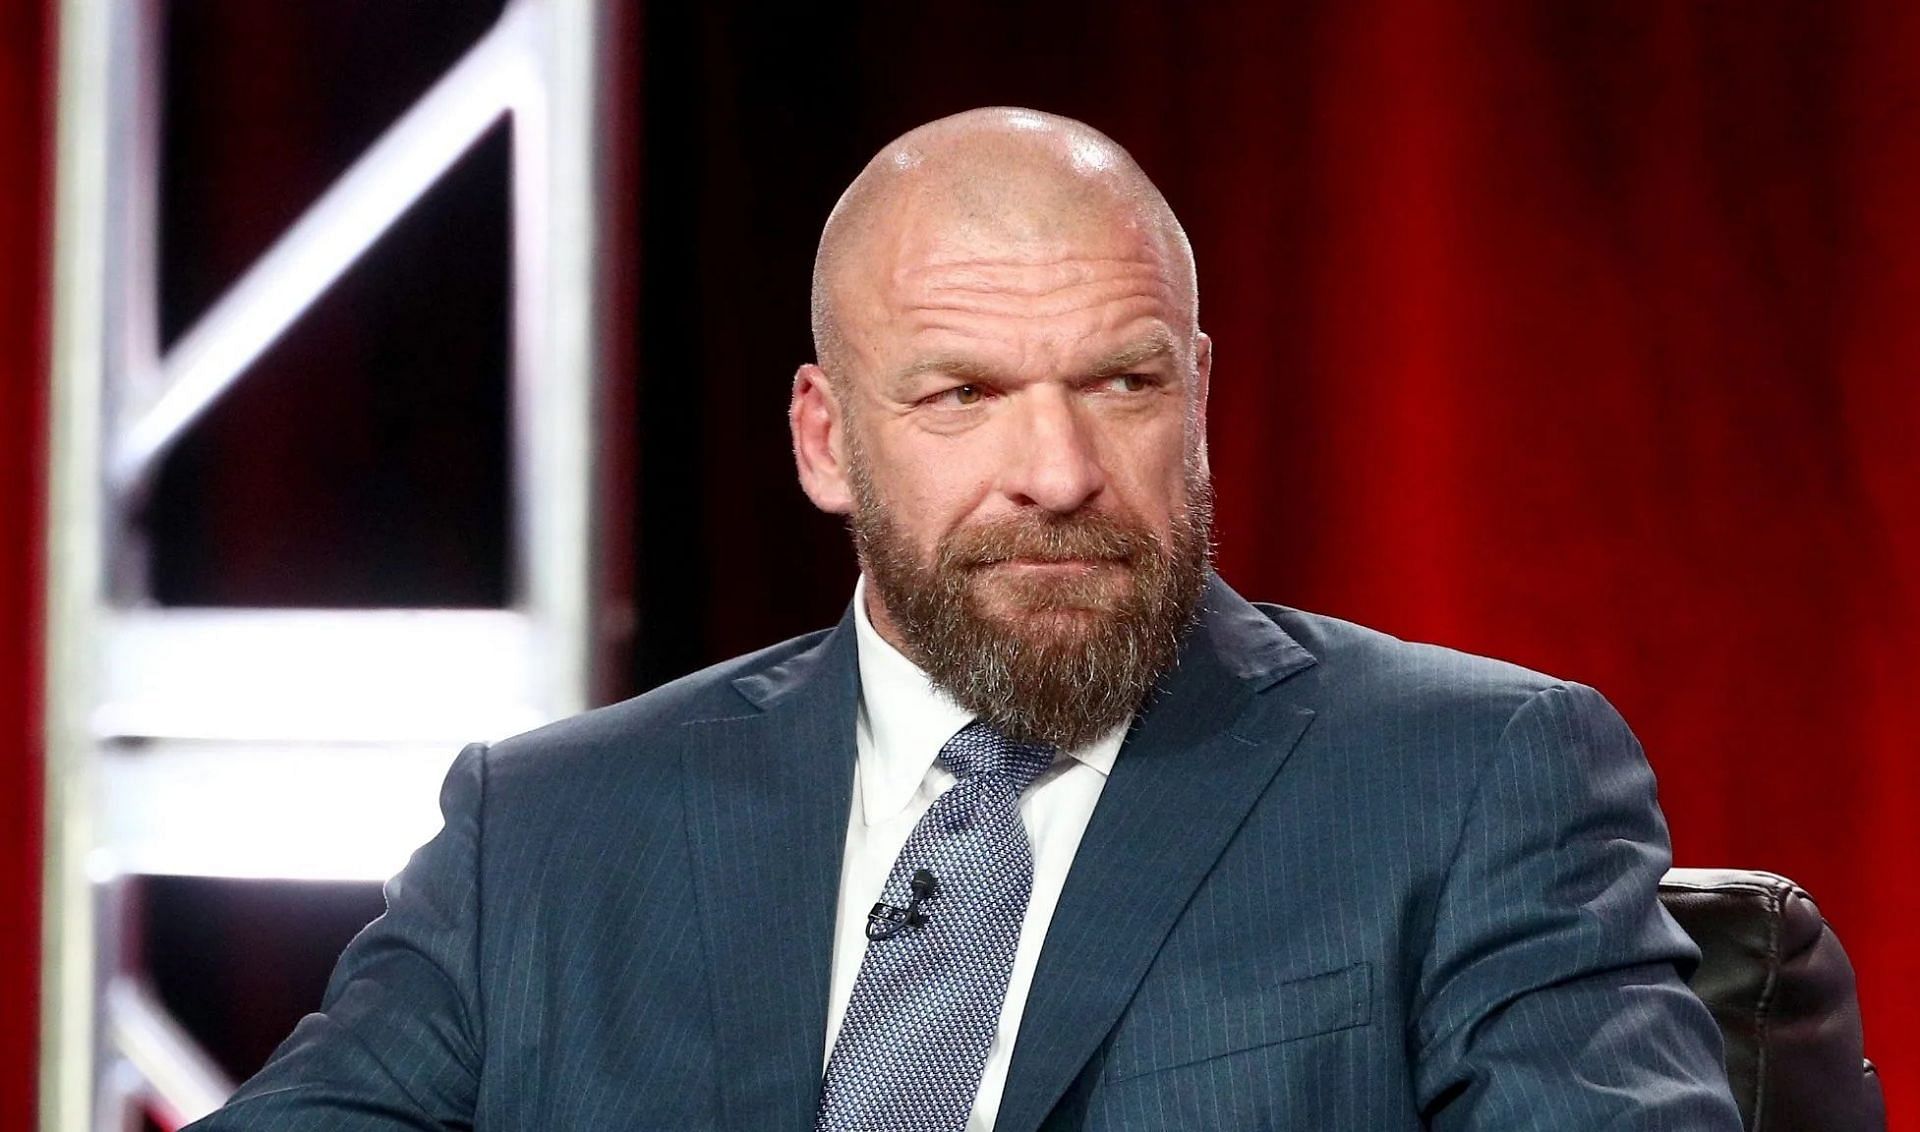 Triple H is the Chief Content Officer in WWE